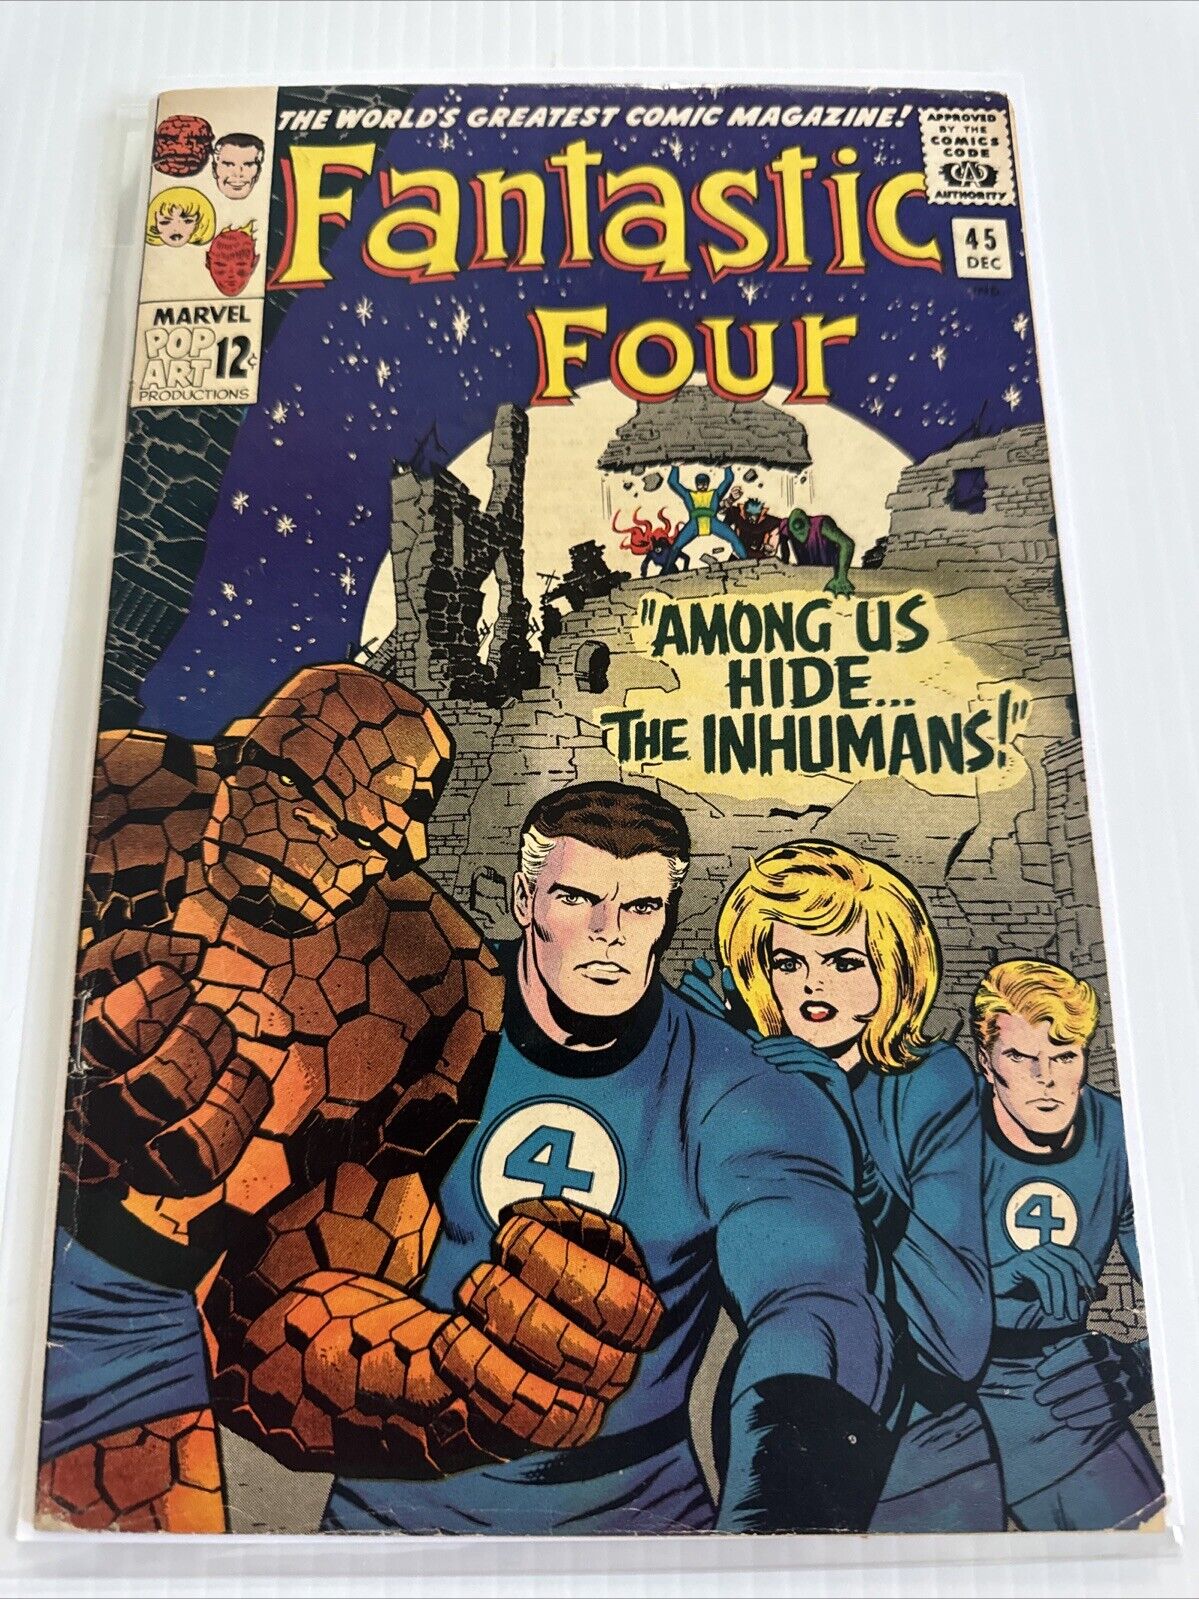 The Fantastic Four #45 - 1st appearance of the Inhumans Marvel Comics 1965 Fine-